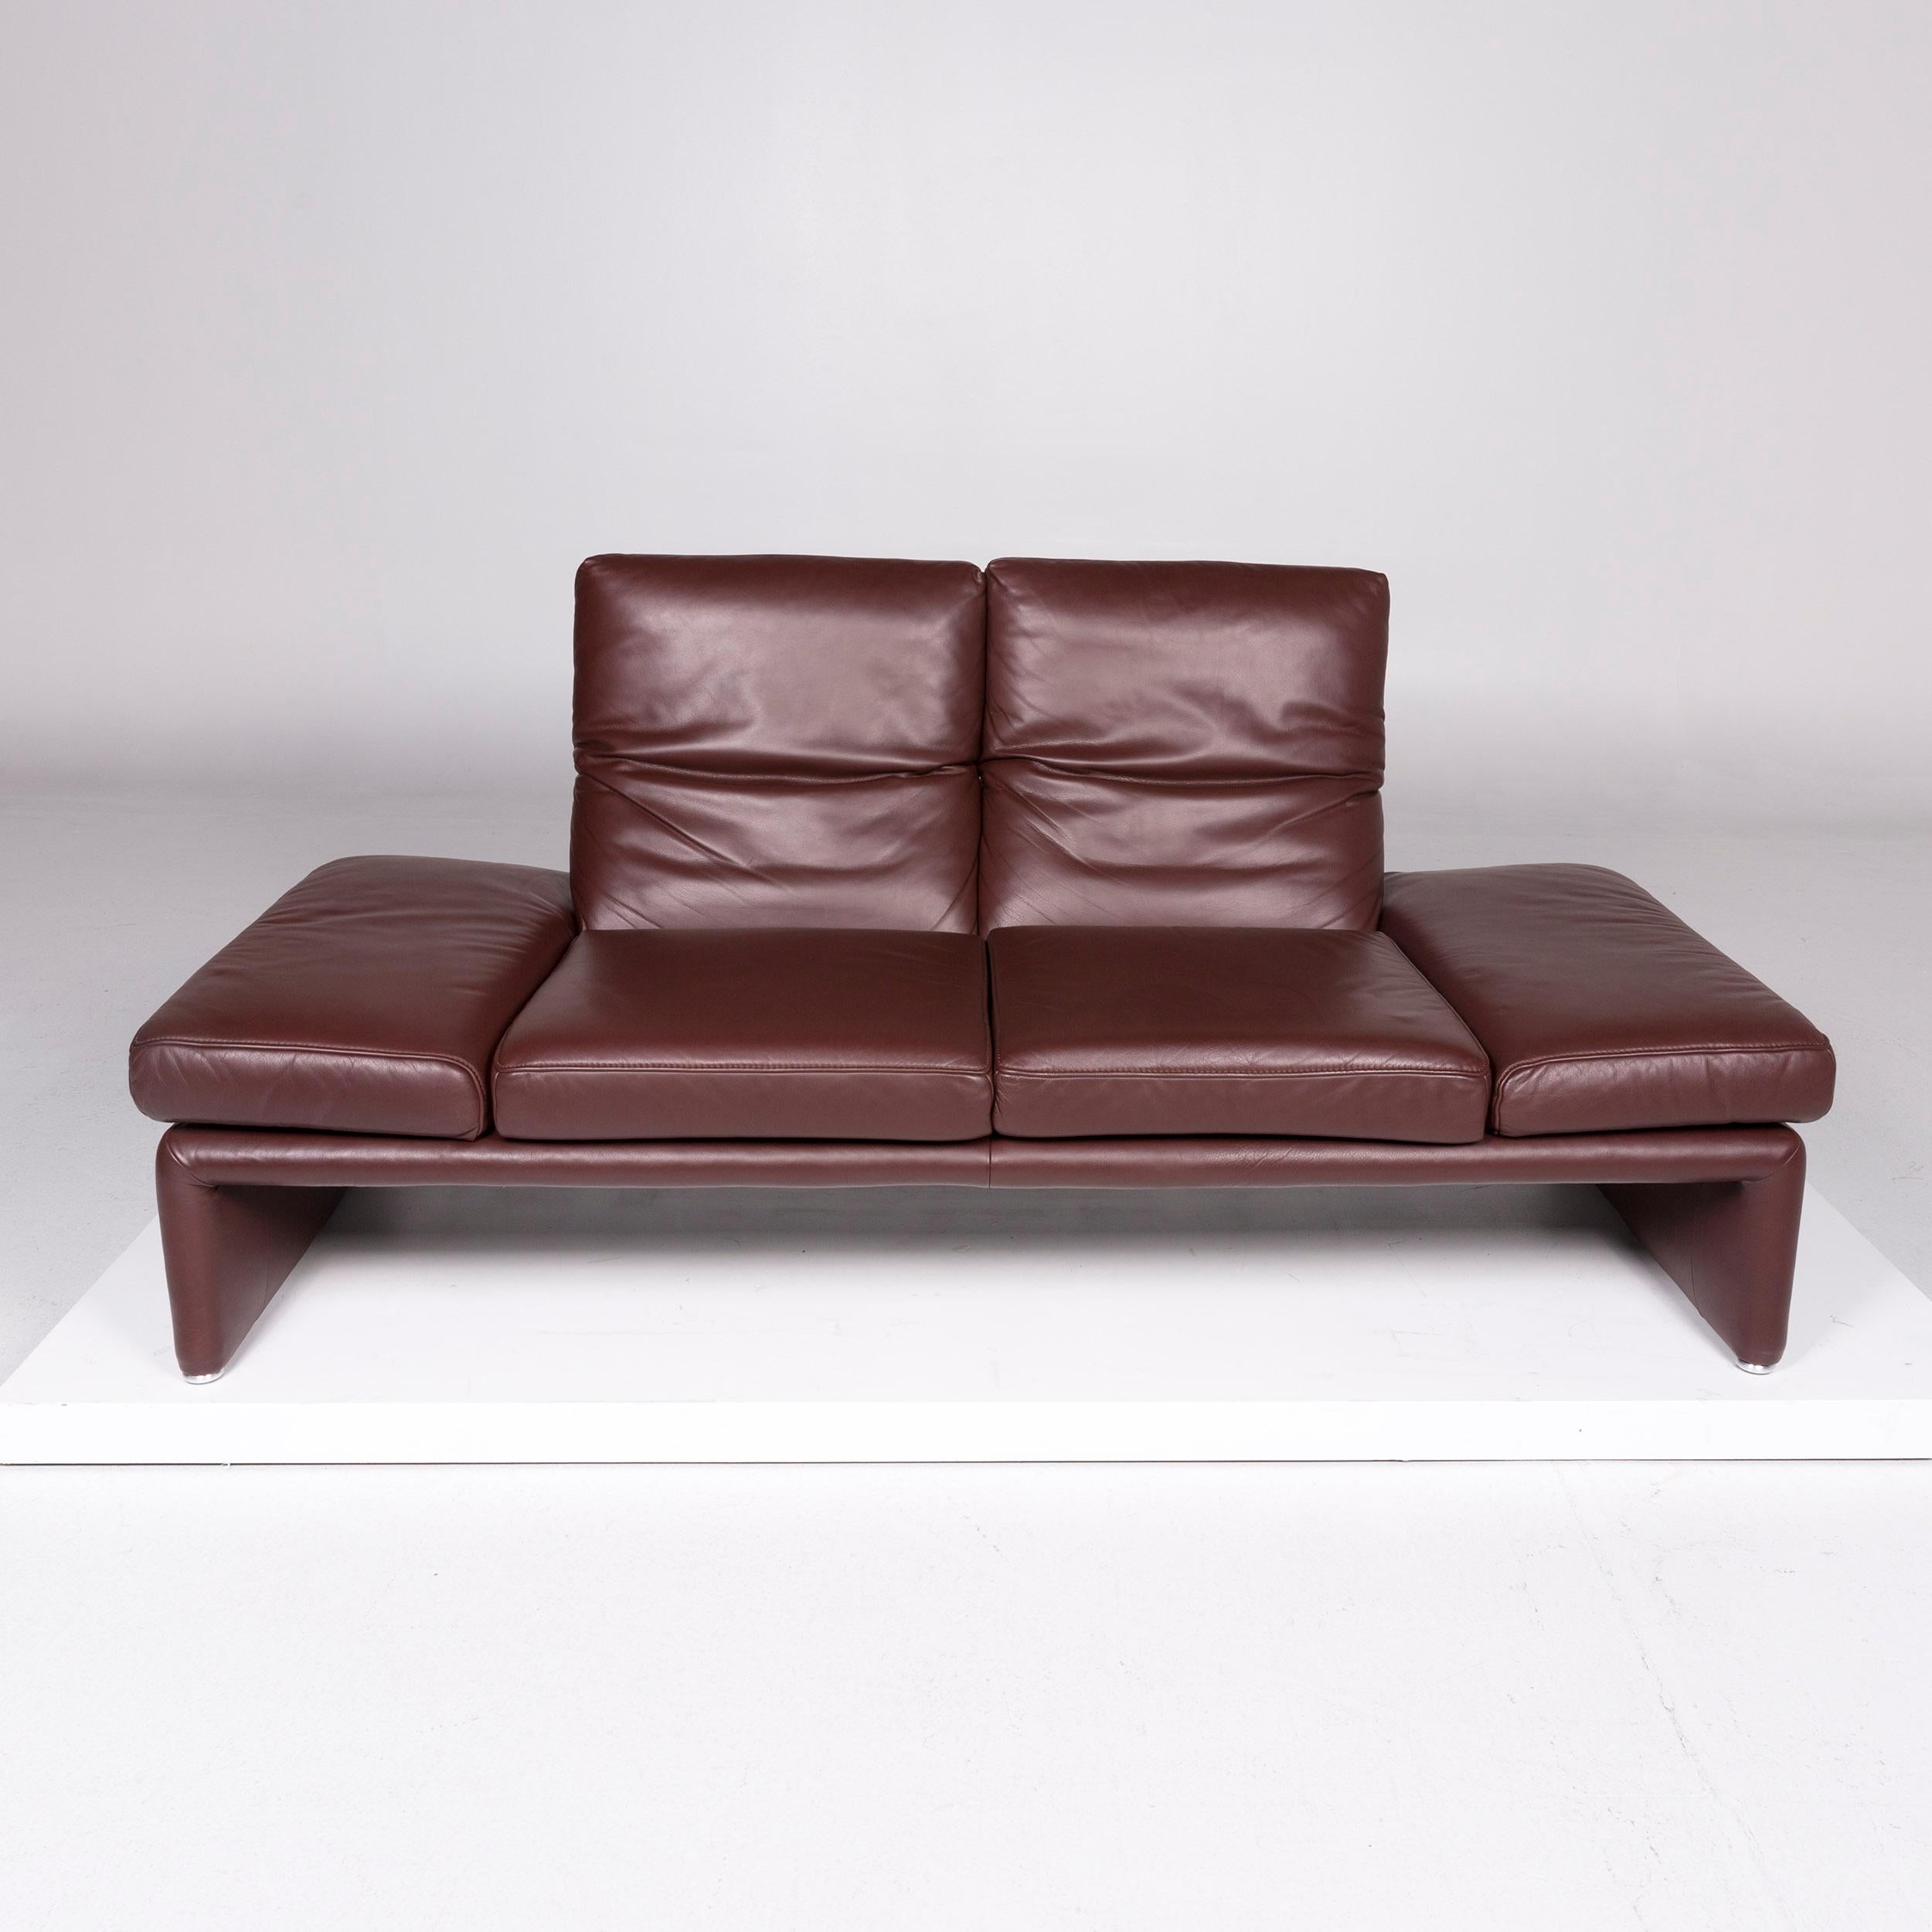 Contemporary Koinor Raoul Leather Sofa Brown Red Brown Two-Seat Function